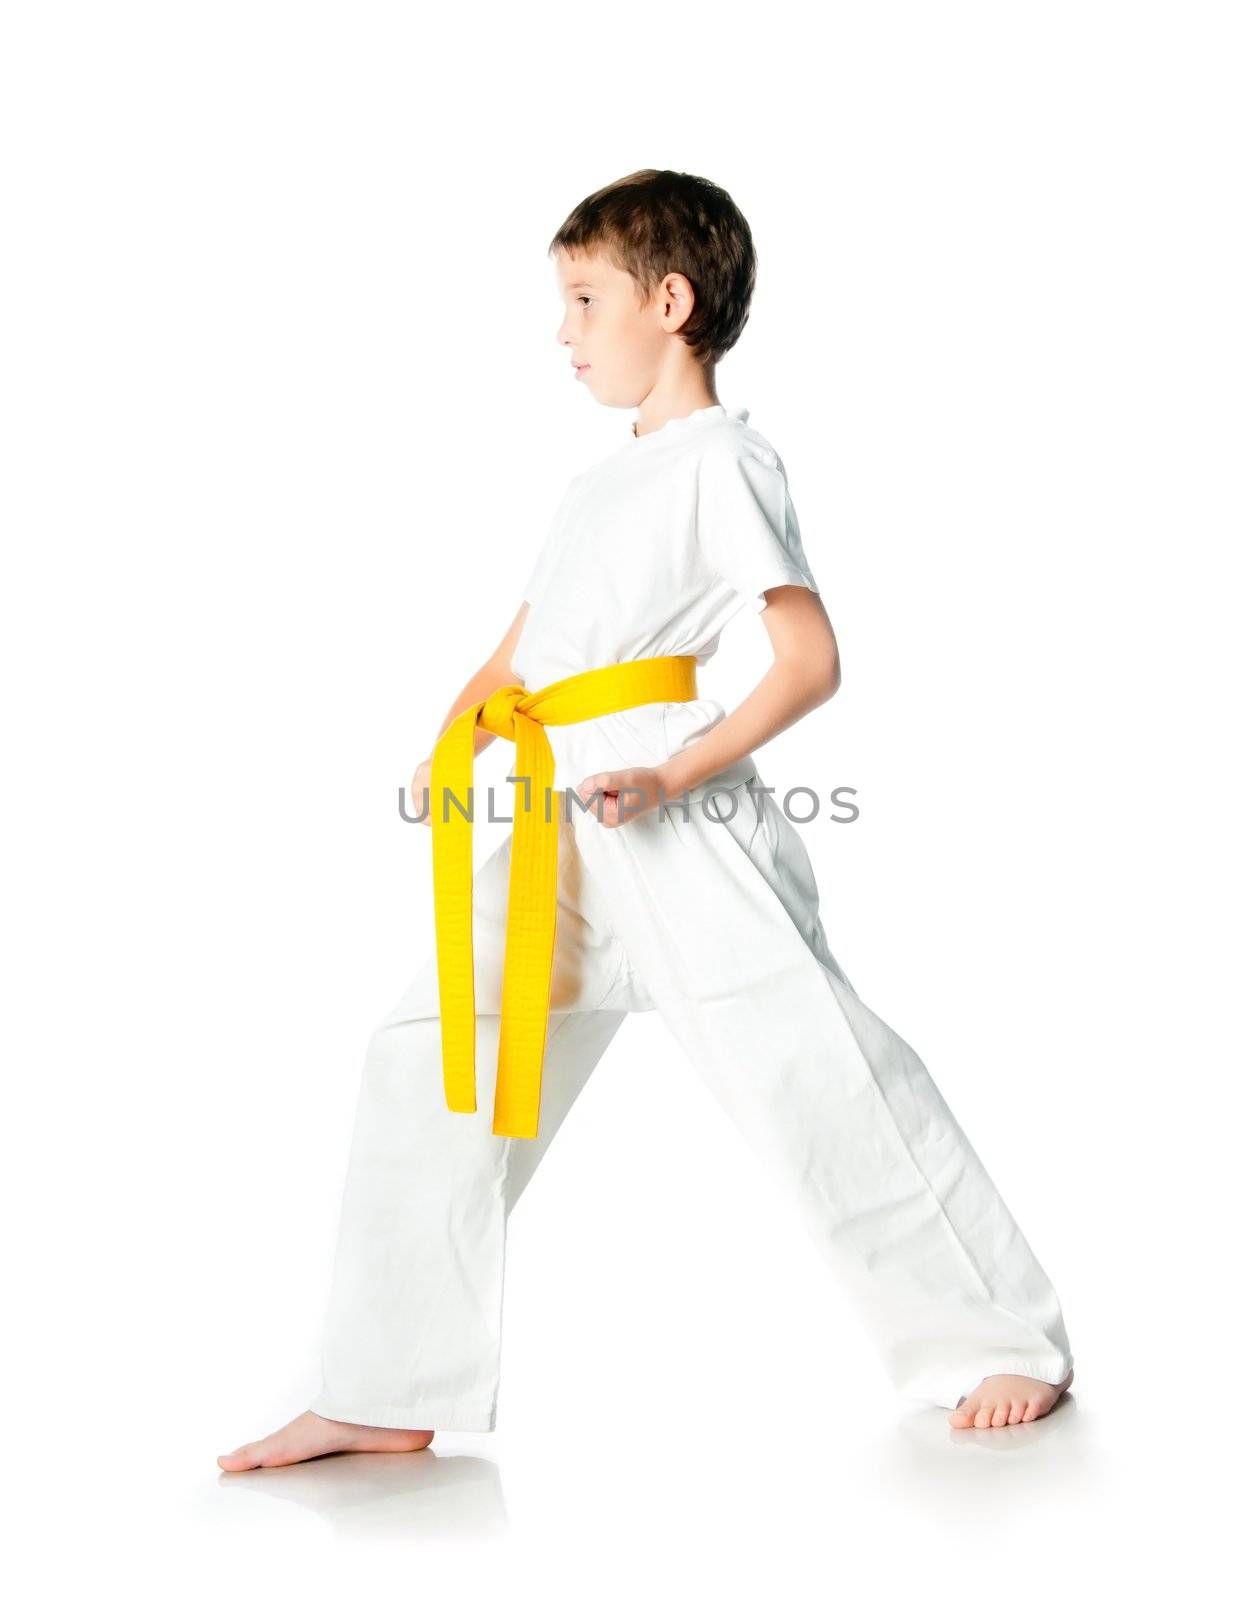 Young boy in kimono with yellow belt  on a white background